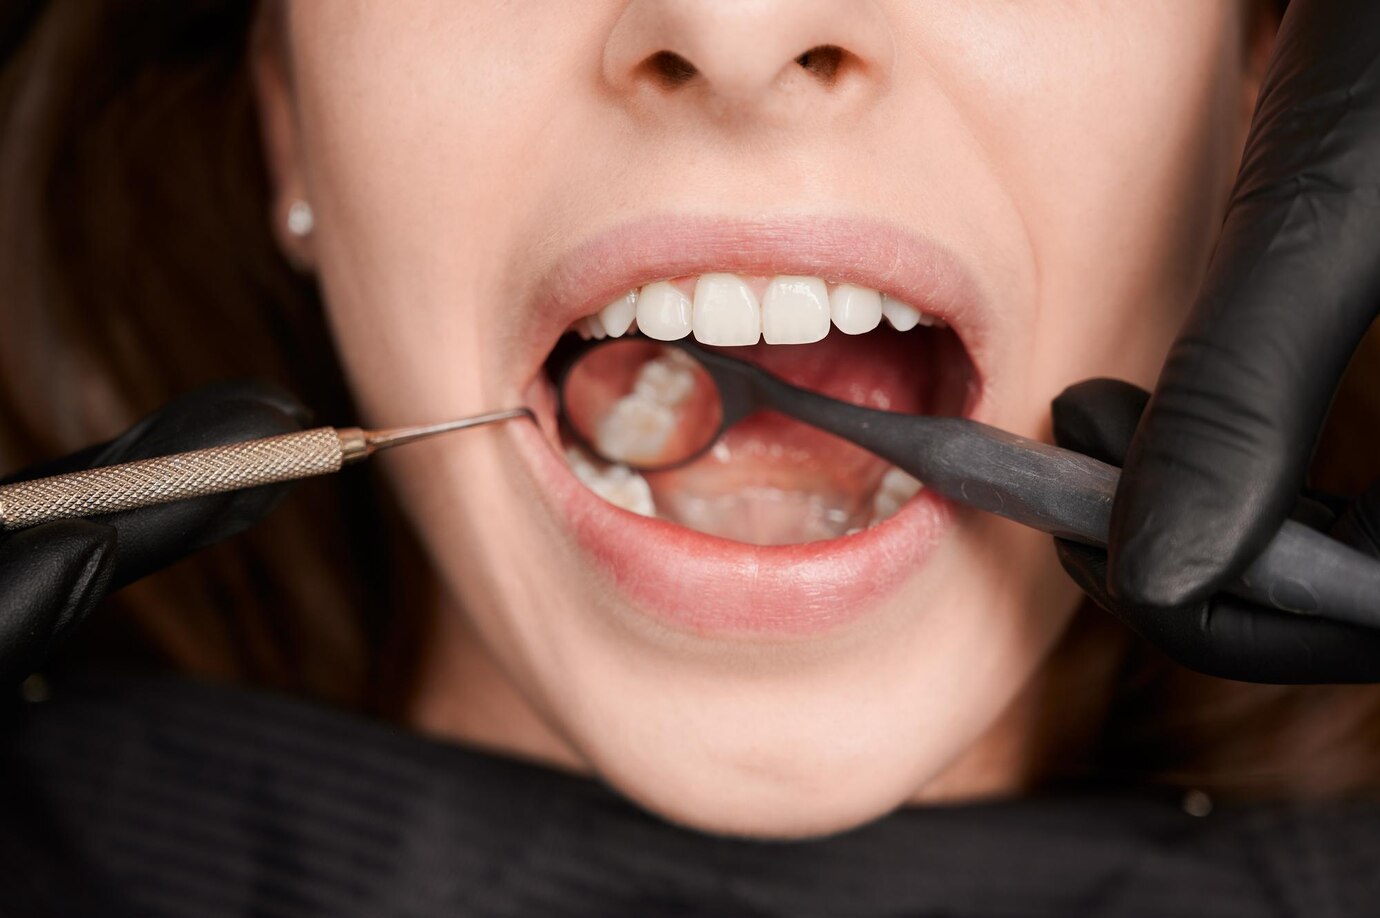 Diabetes can impact oral health - here's what you need to know